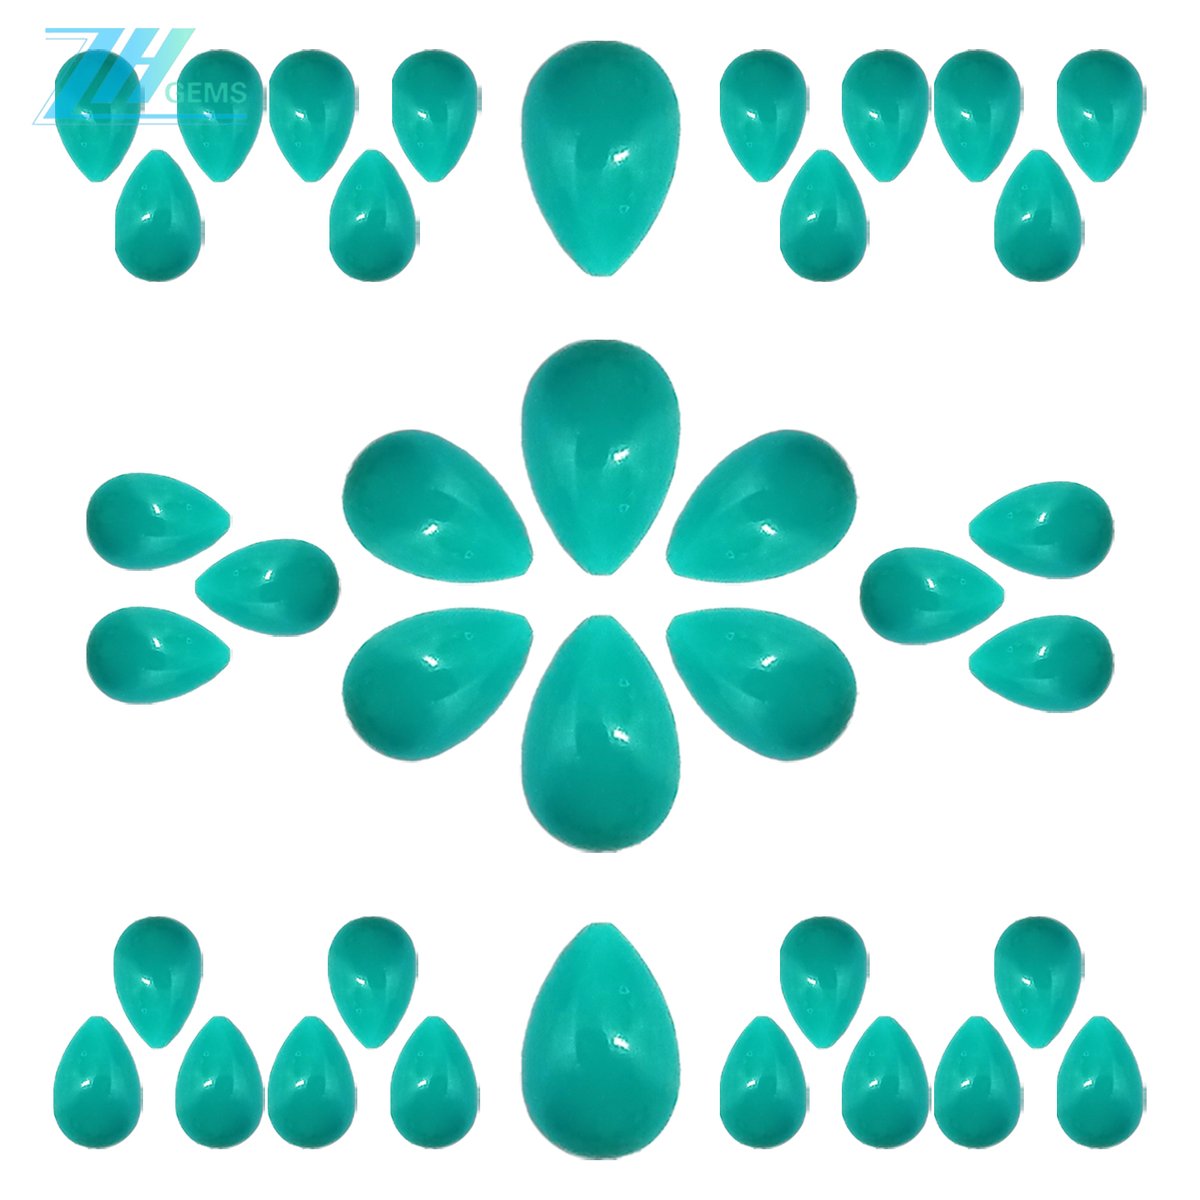 Natural turquoise oval-shape cabochon size 8mm*10mm  20240402-05-08  #ootd  #bluebybryant  #fyp  #bittytees  #jewlery  #handmade  #smallbatch  #smallbusiness  #smallbusinesscheck  #kingmanturquoise  #turquoise  #turquoisejewelry  #turquoiseearrings  #earrings  #studs  #fyp